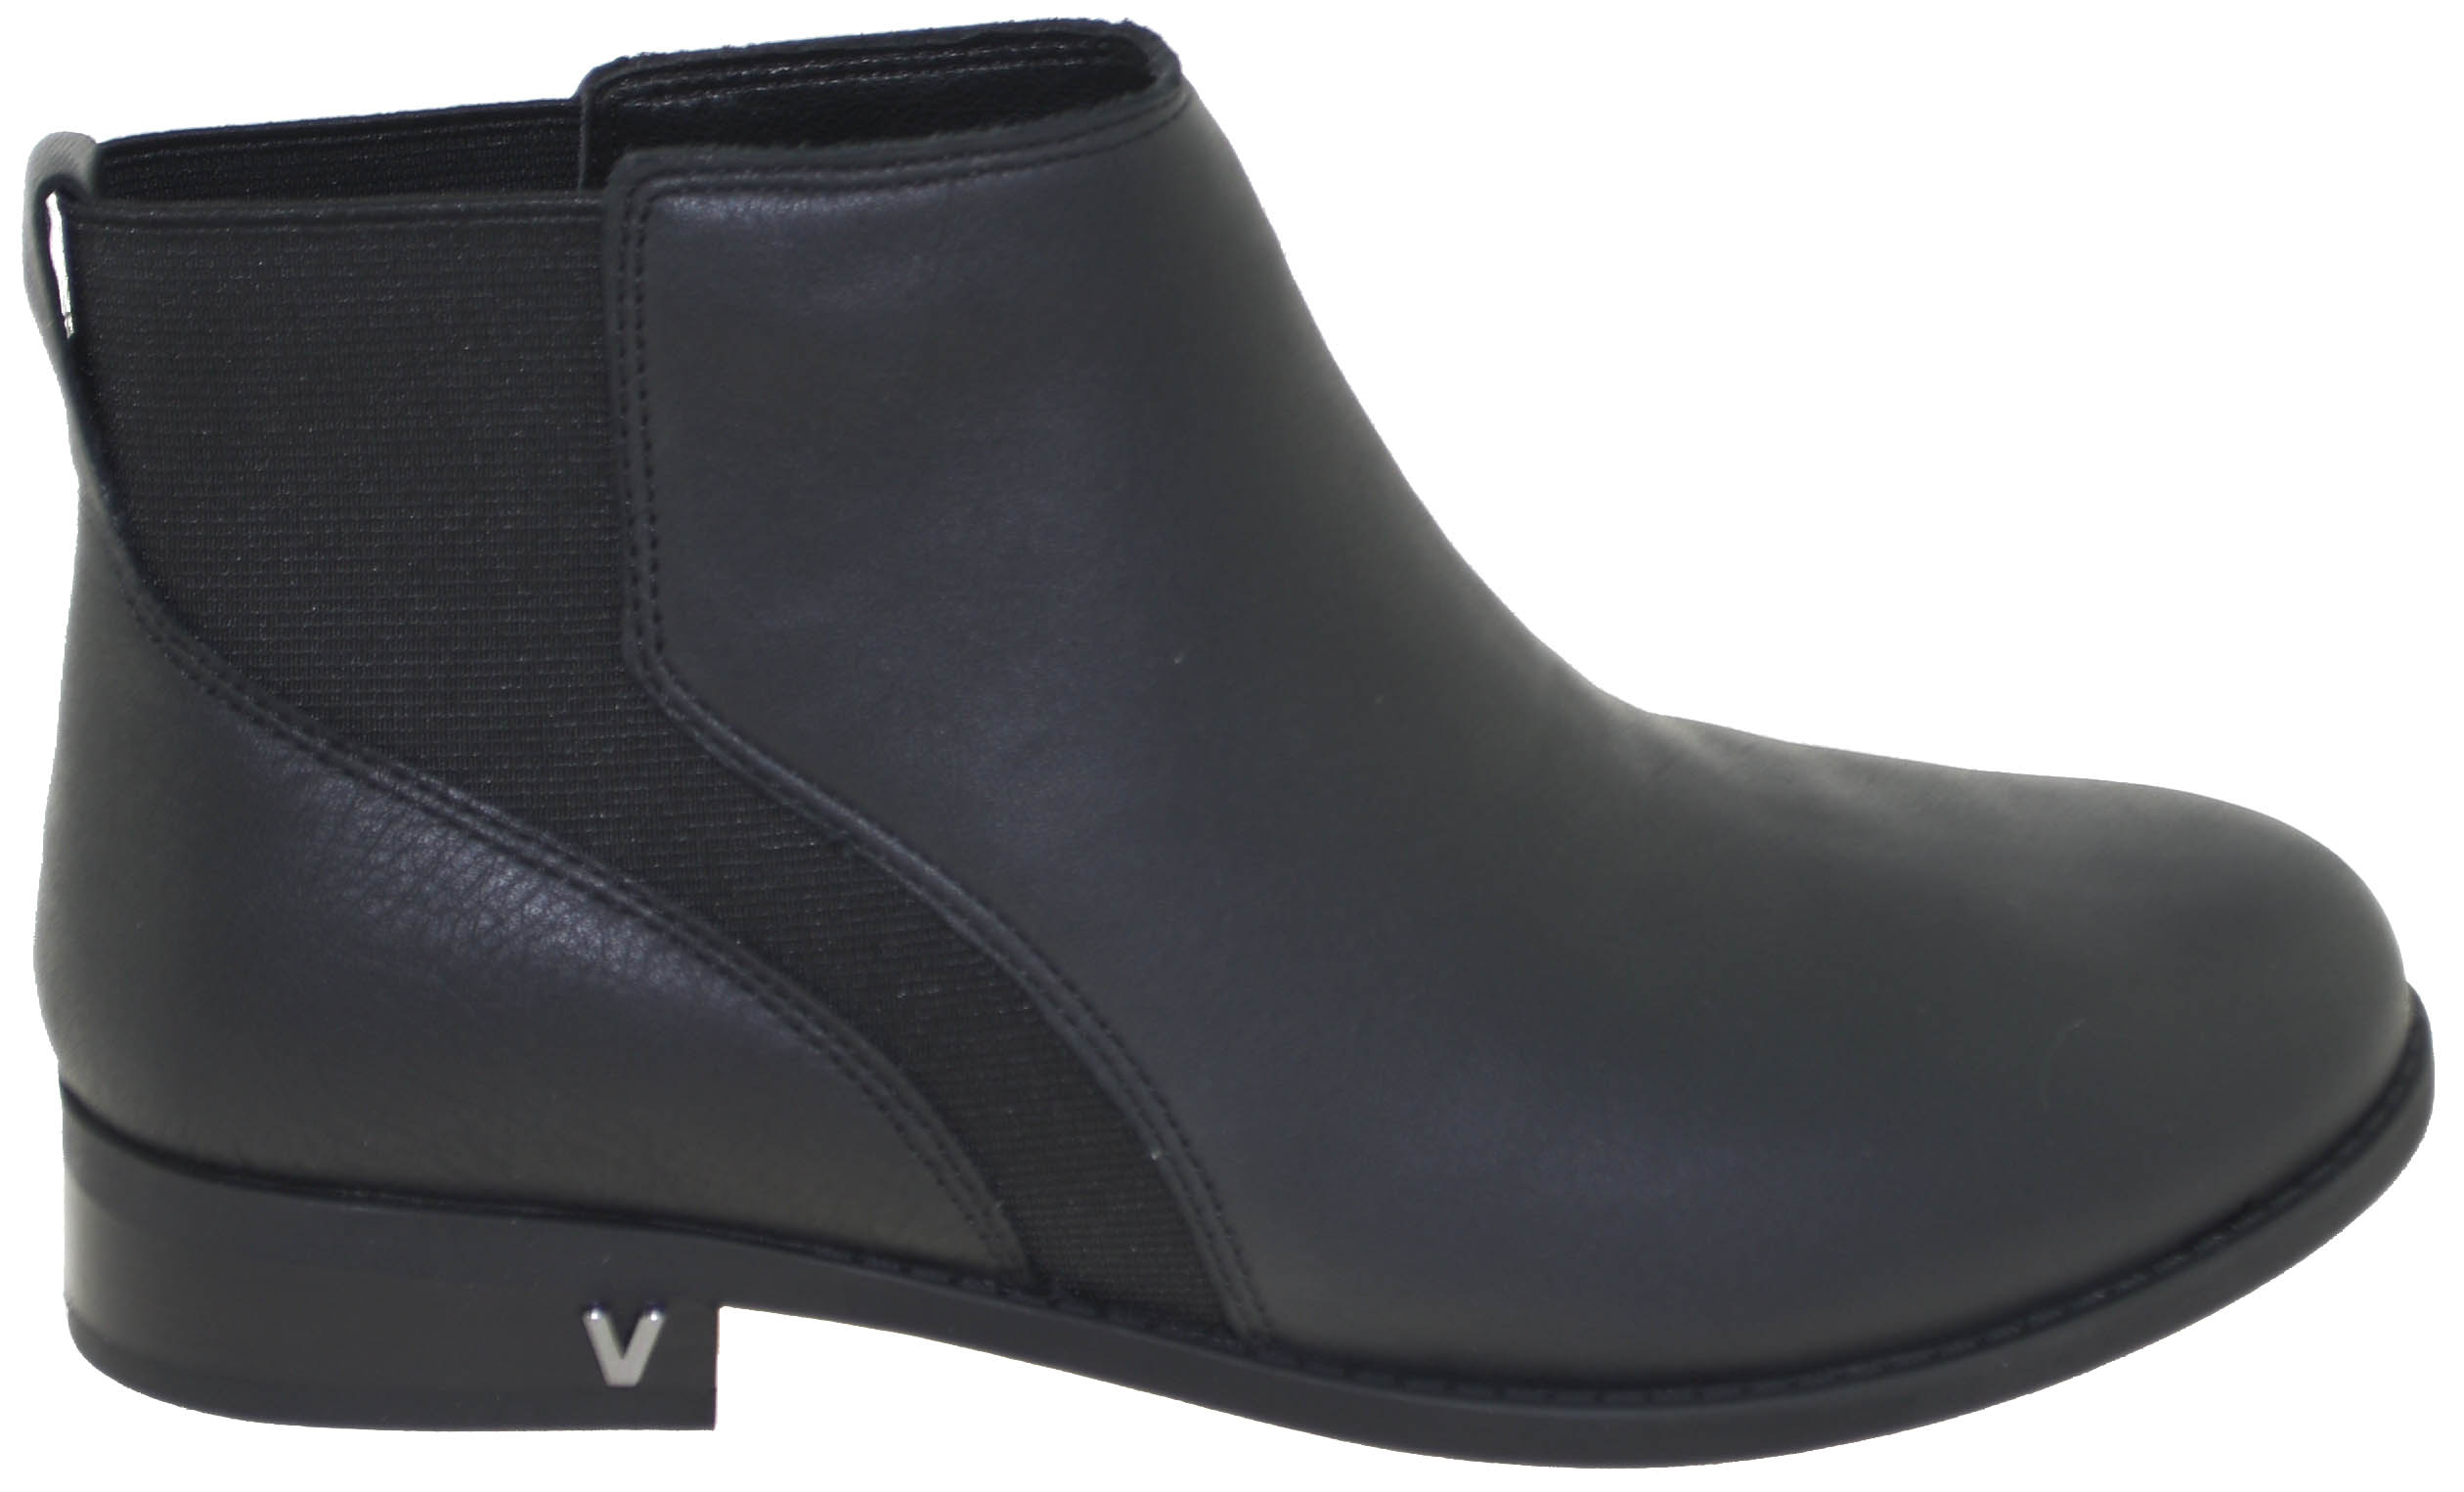 Vionic Women's Country Thatcher Ankle Boot Black | eBay